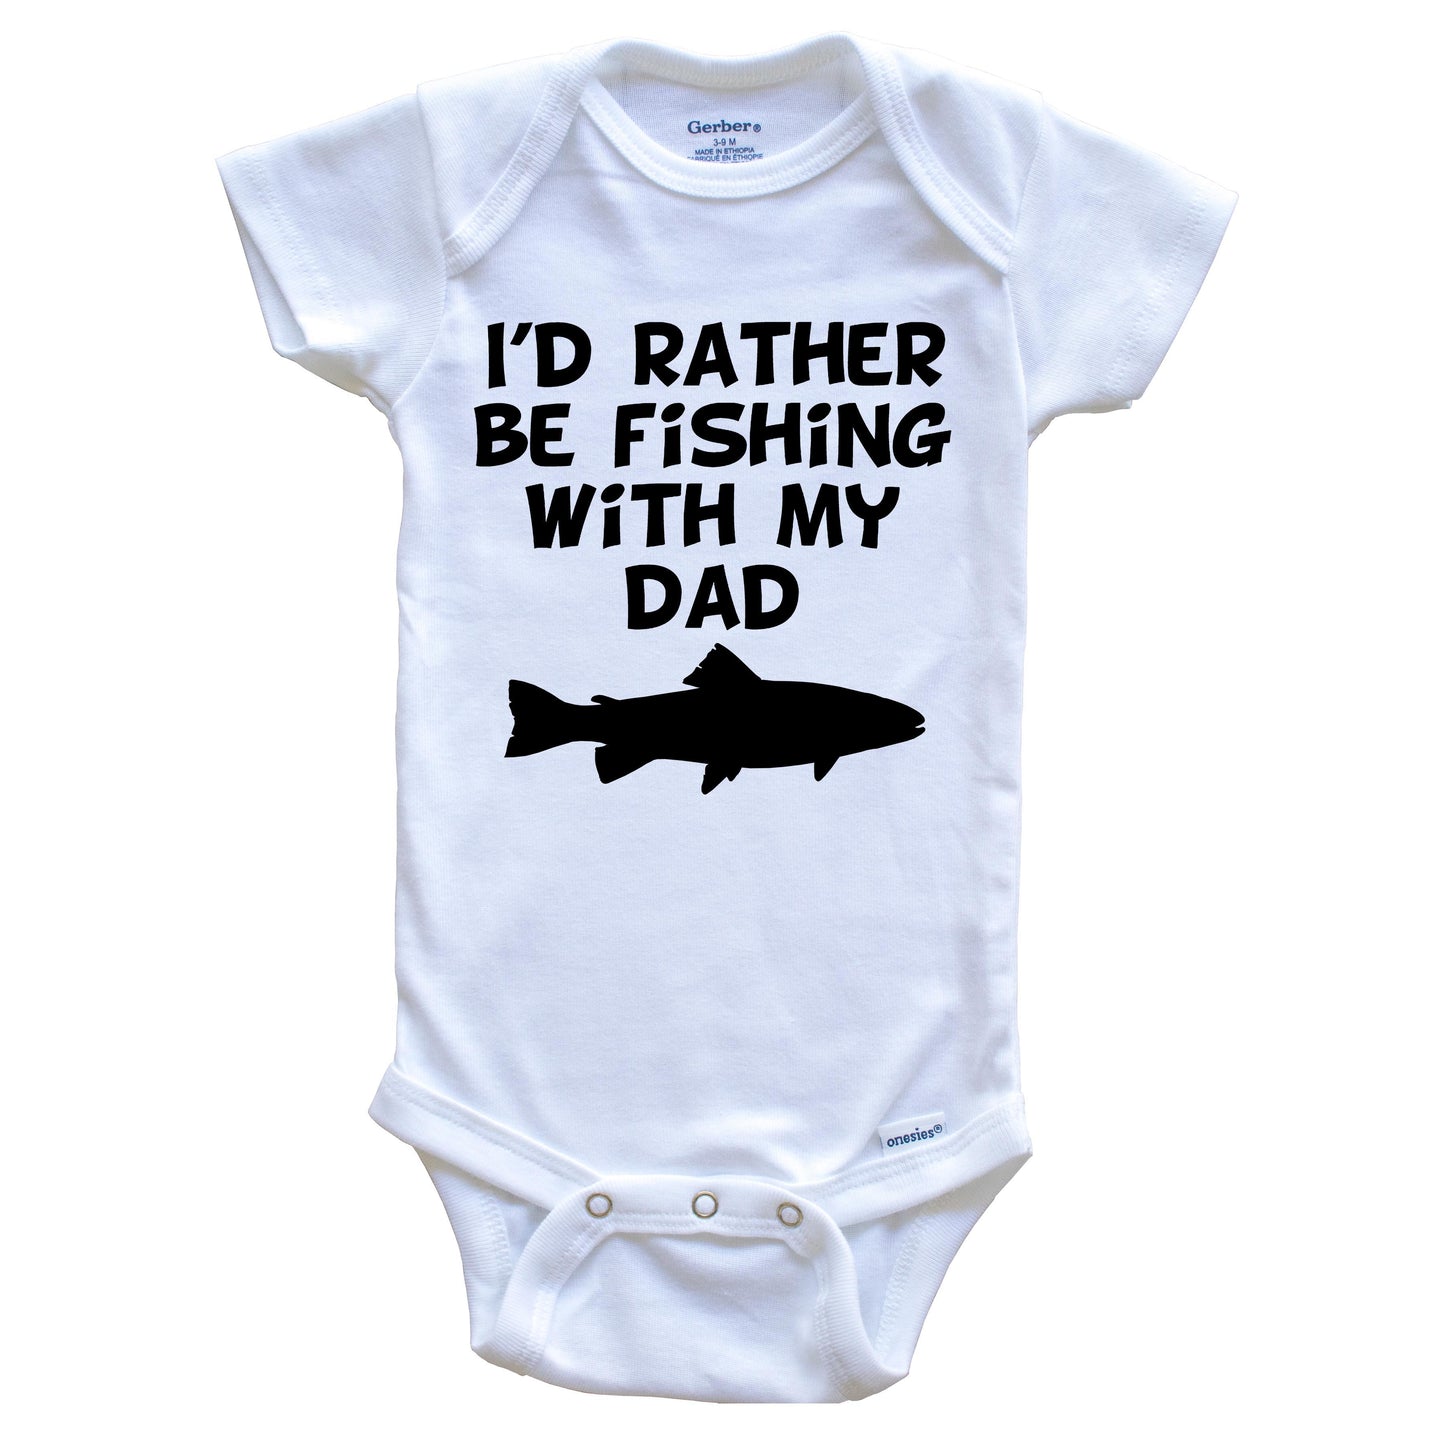 I'd Rather Be Fishing With My Dad Baby Onesie